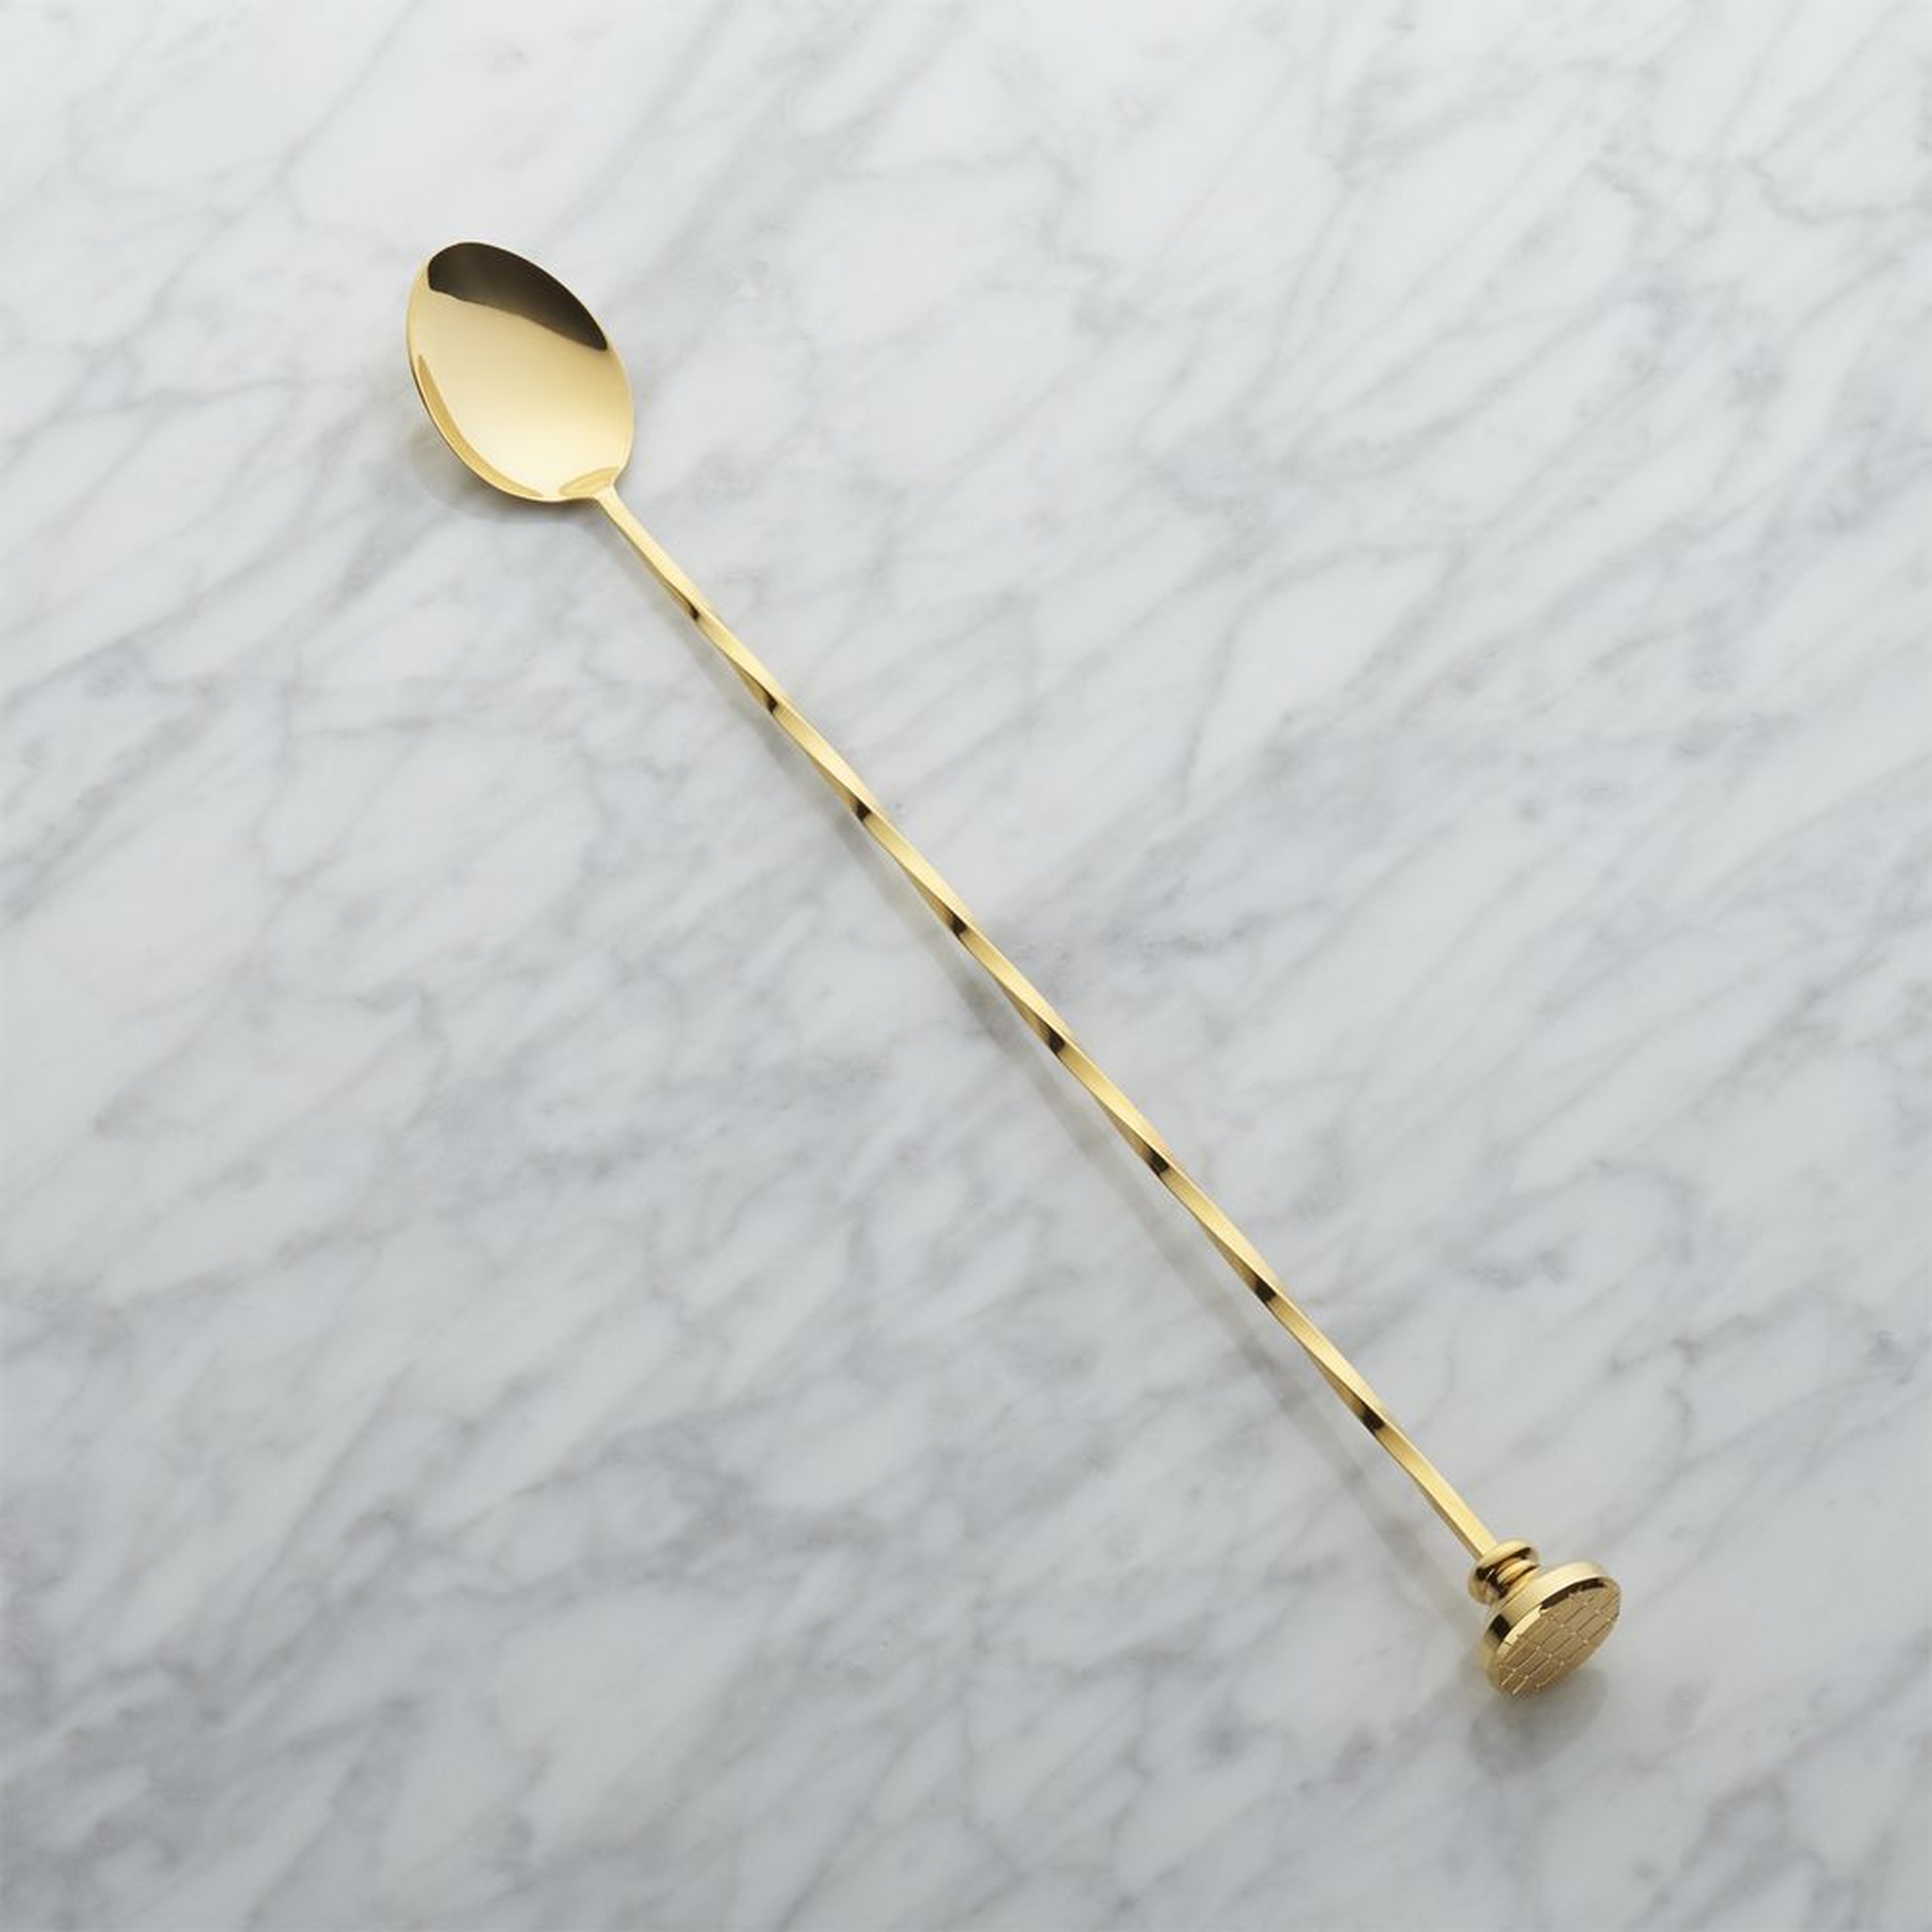 Gold Bar Spoon With Muddler - Crate and Barrel